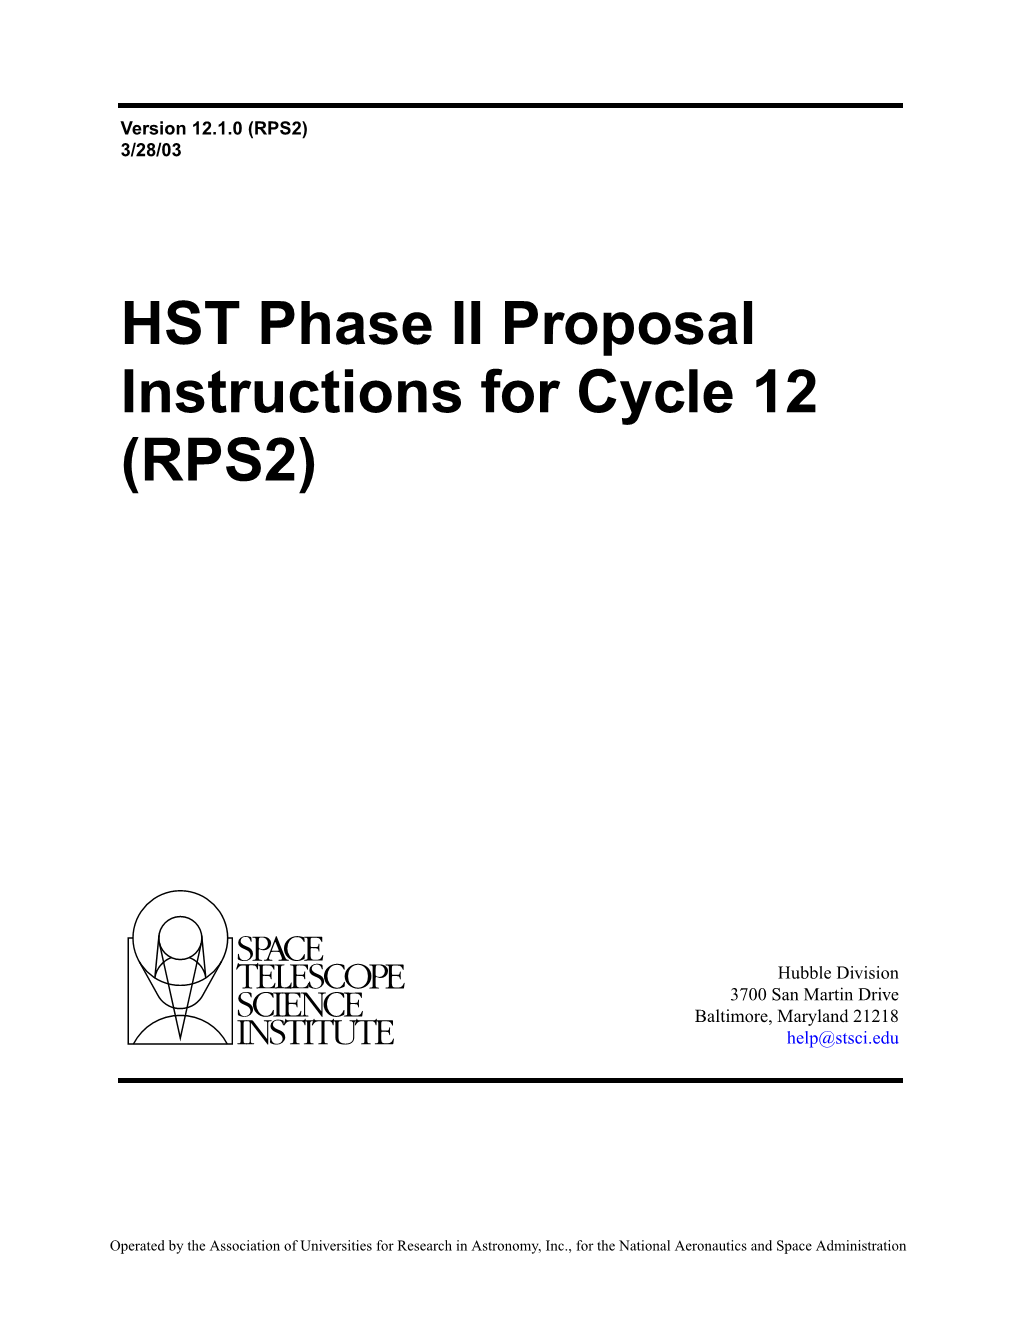 HST Phase II Proposal Instructions for Cycle 12 (RPS2)